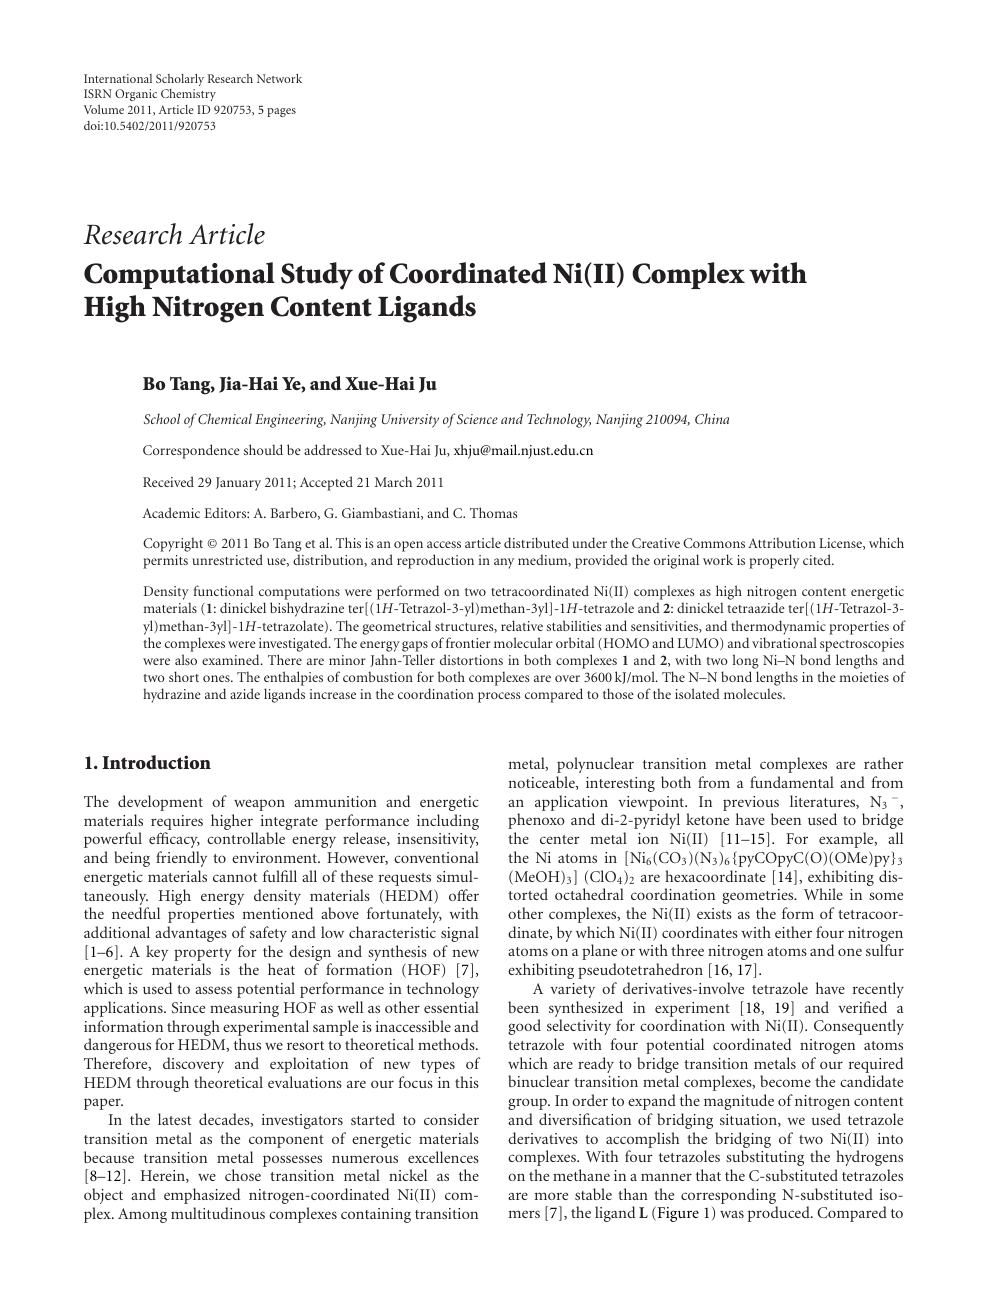 Computational Study Of Coordinated Ni Ii Complex With High Nitrogen Content Ligands Topic Of Research Paper In Chemical Sciences Download Scholarly Article Pdf And Read For Free On Cyberleninka Open Science Hub